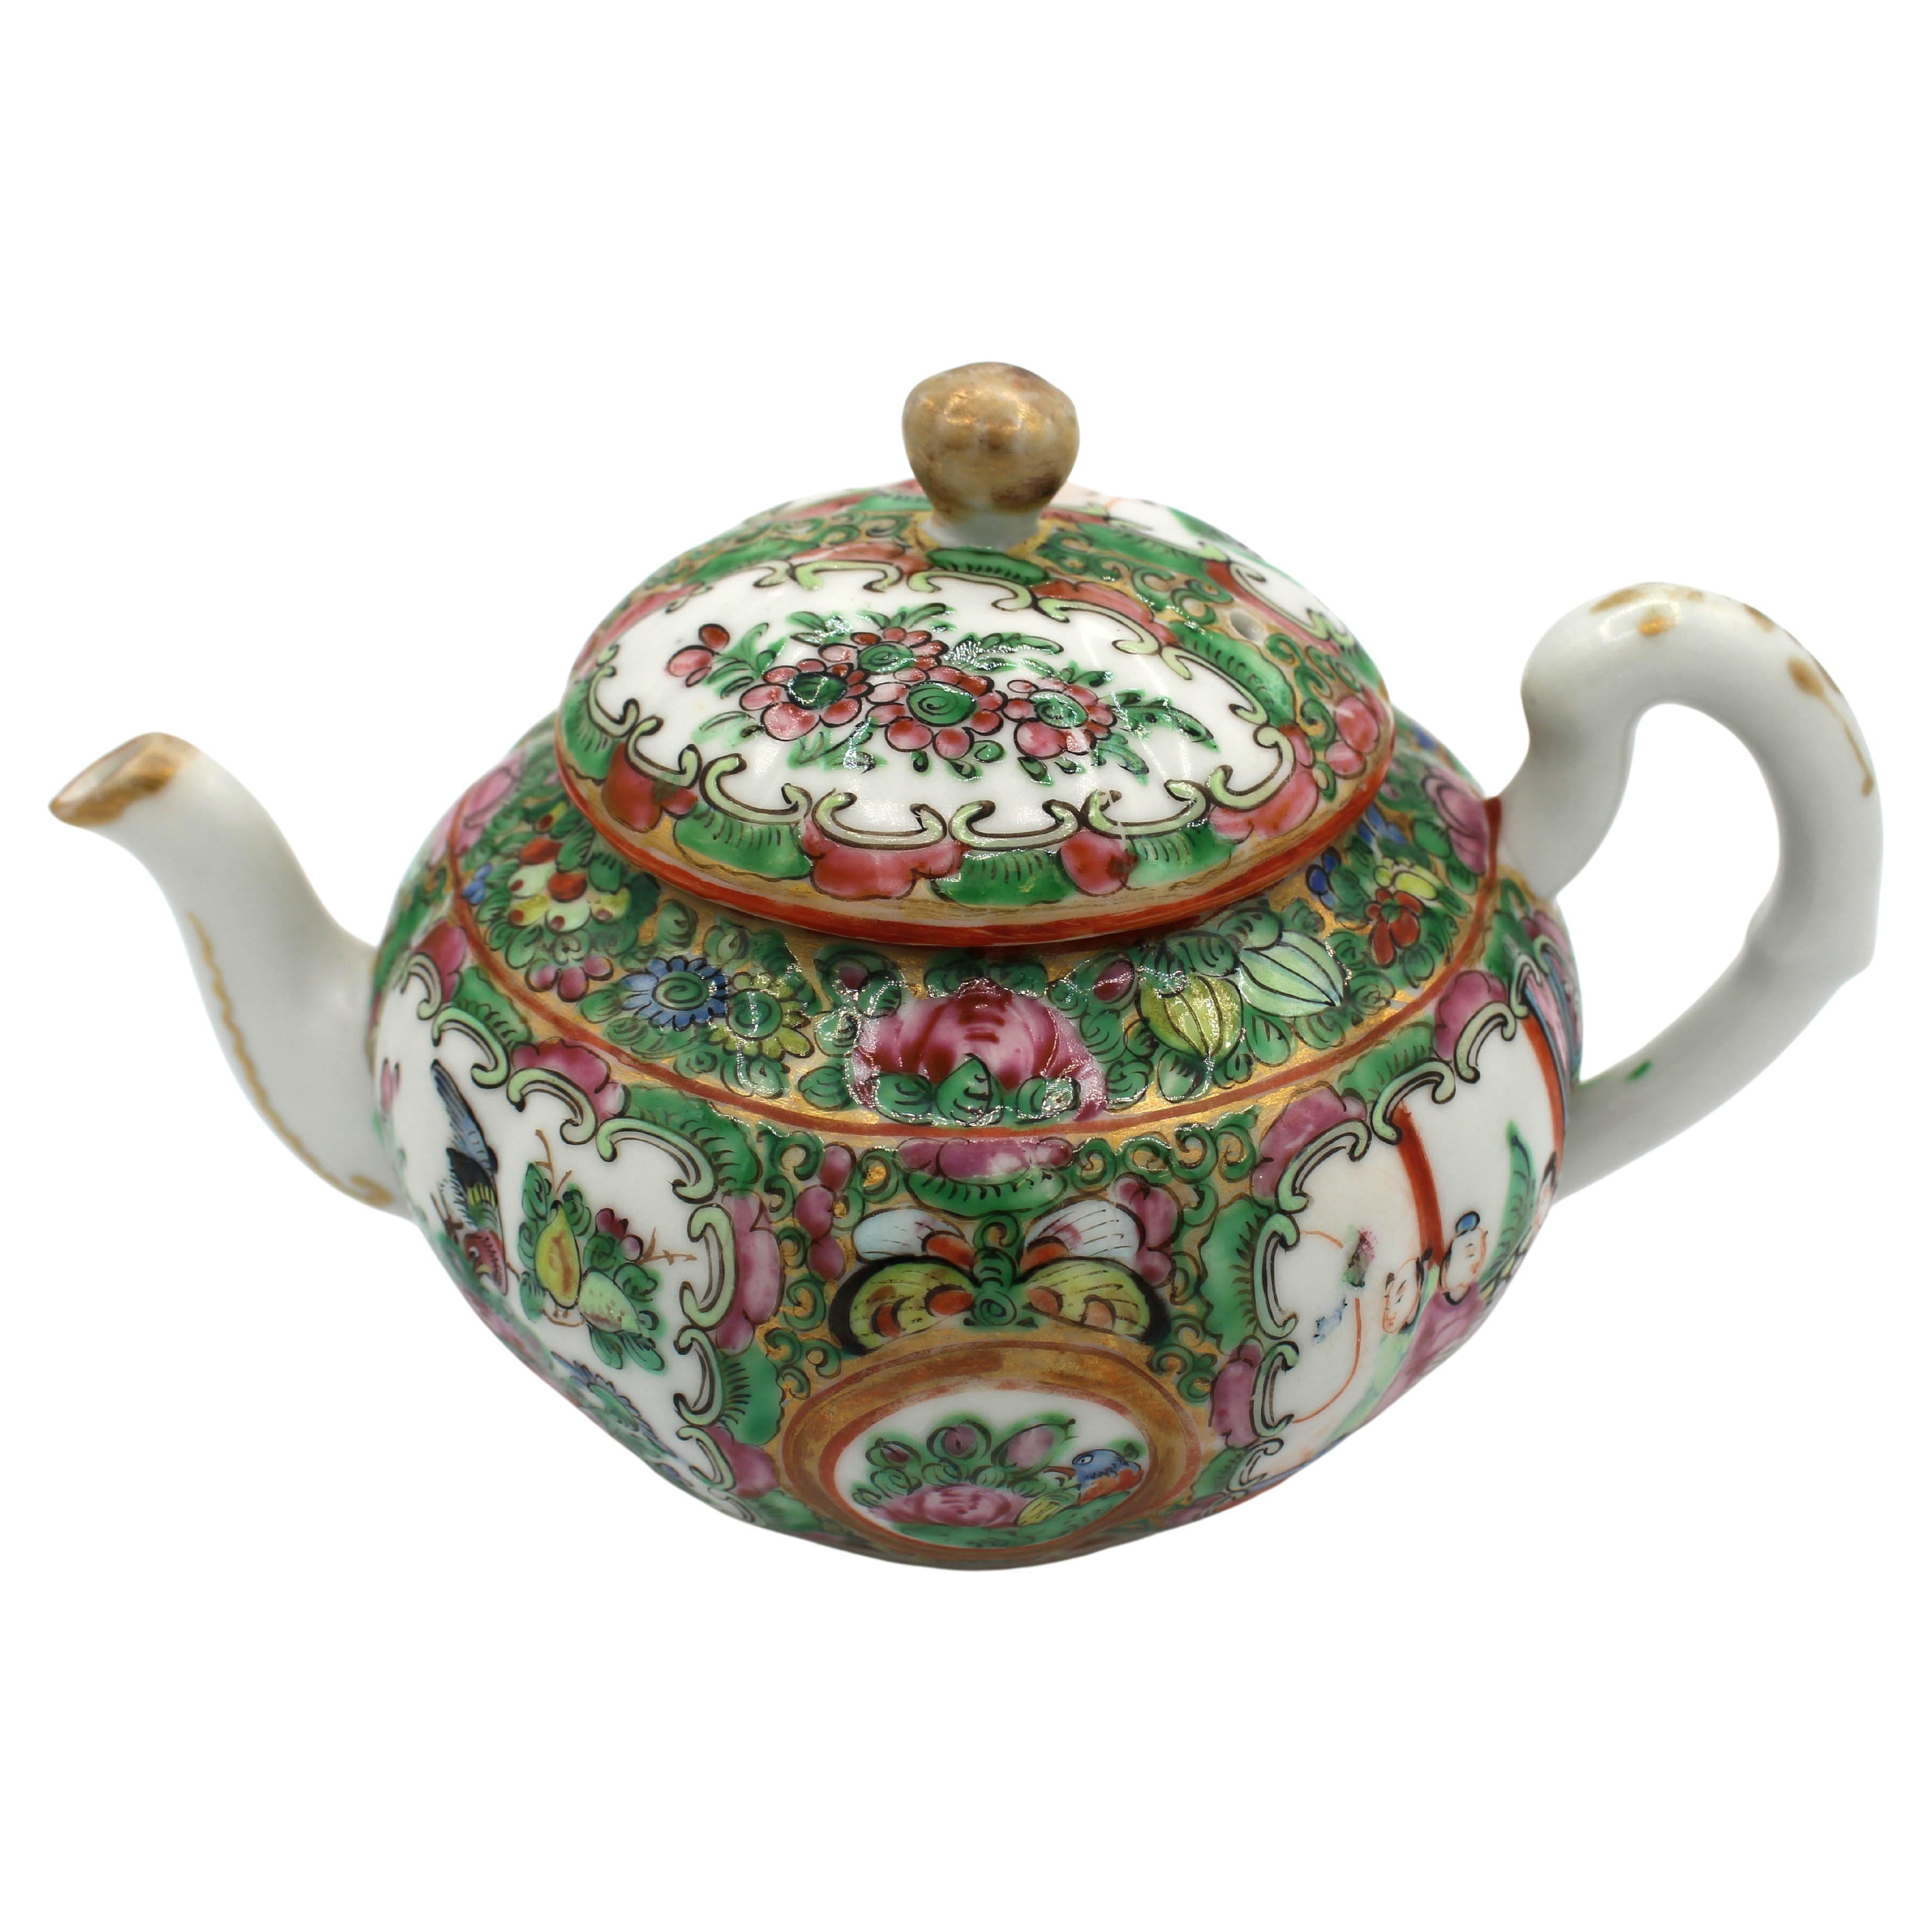 Circa 1880s Chinese Export Rose Medallion Tea Pot & Cover For Sale